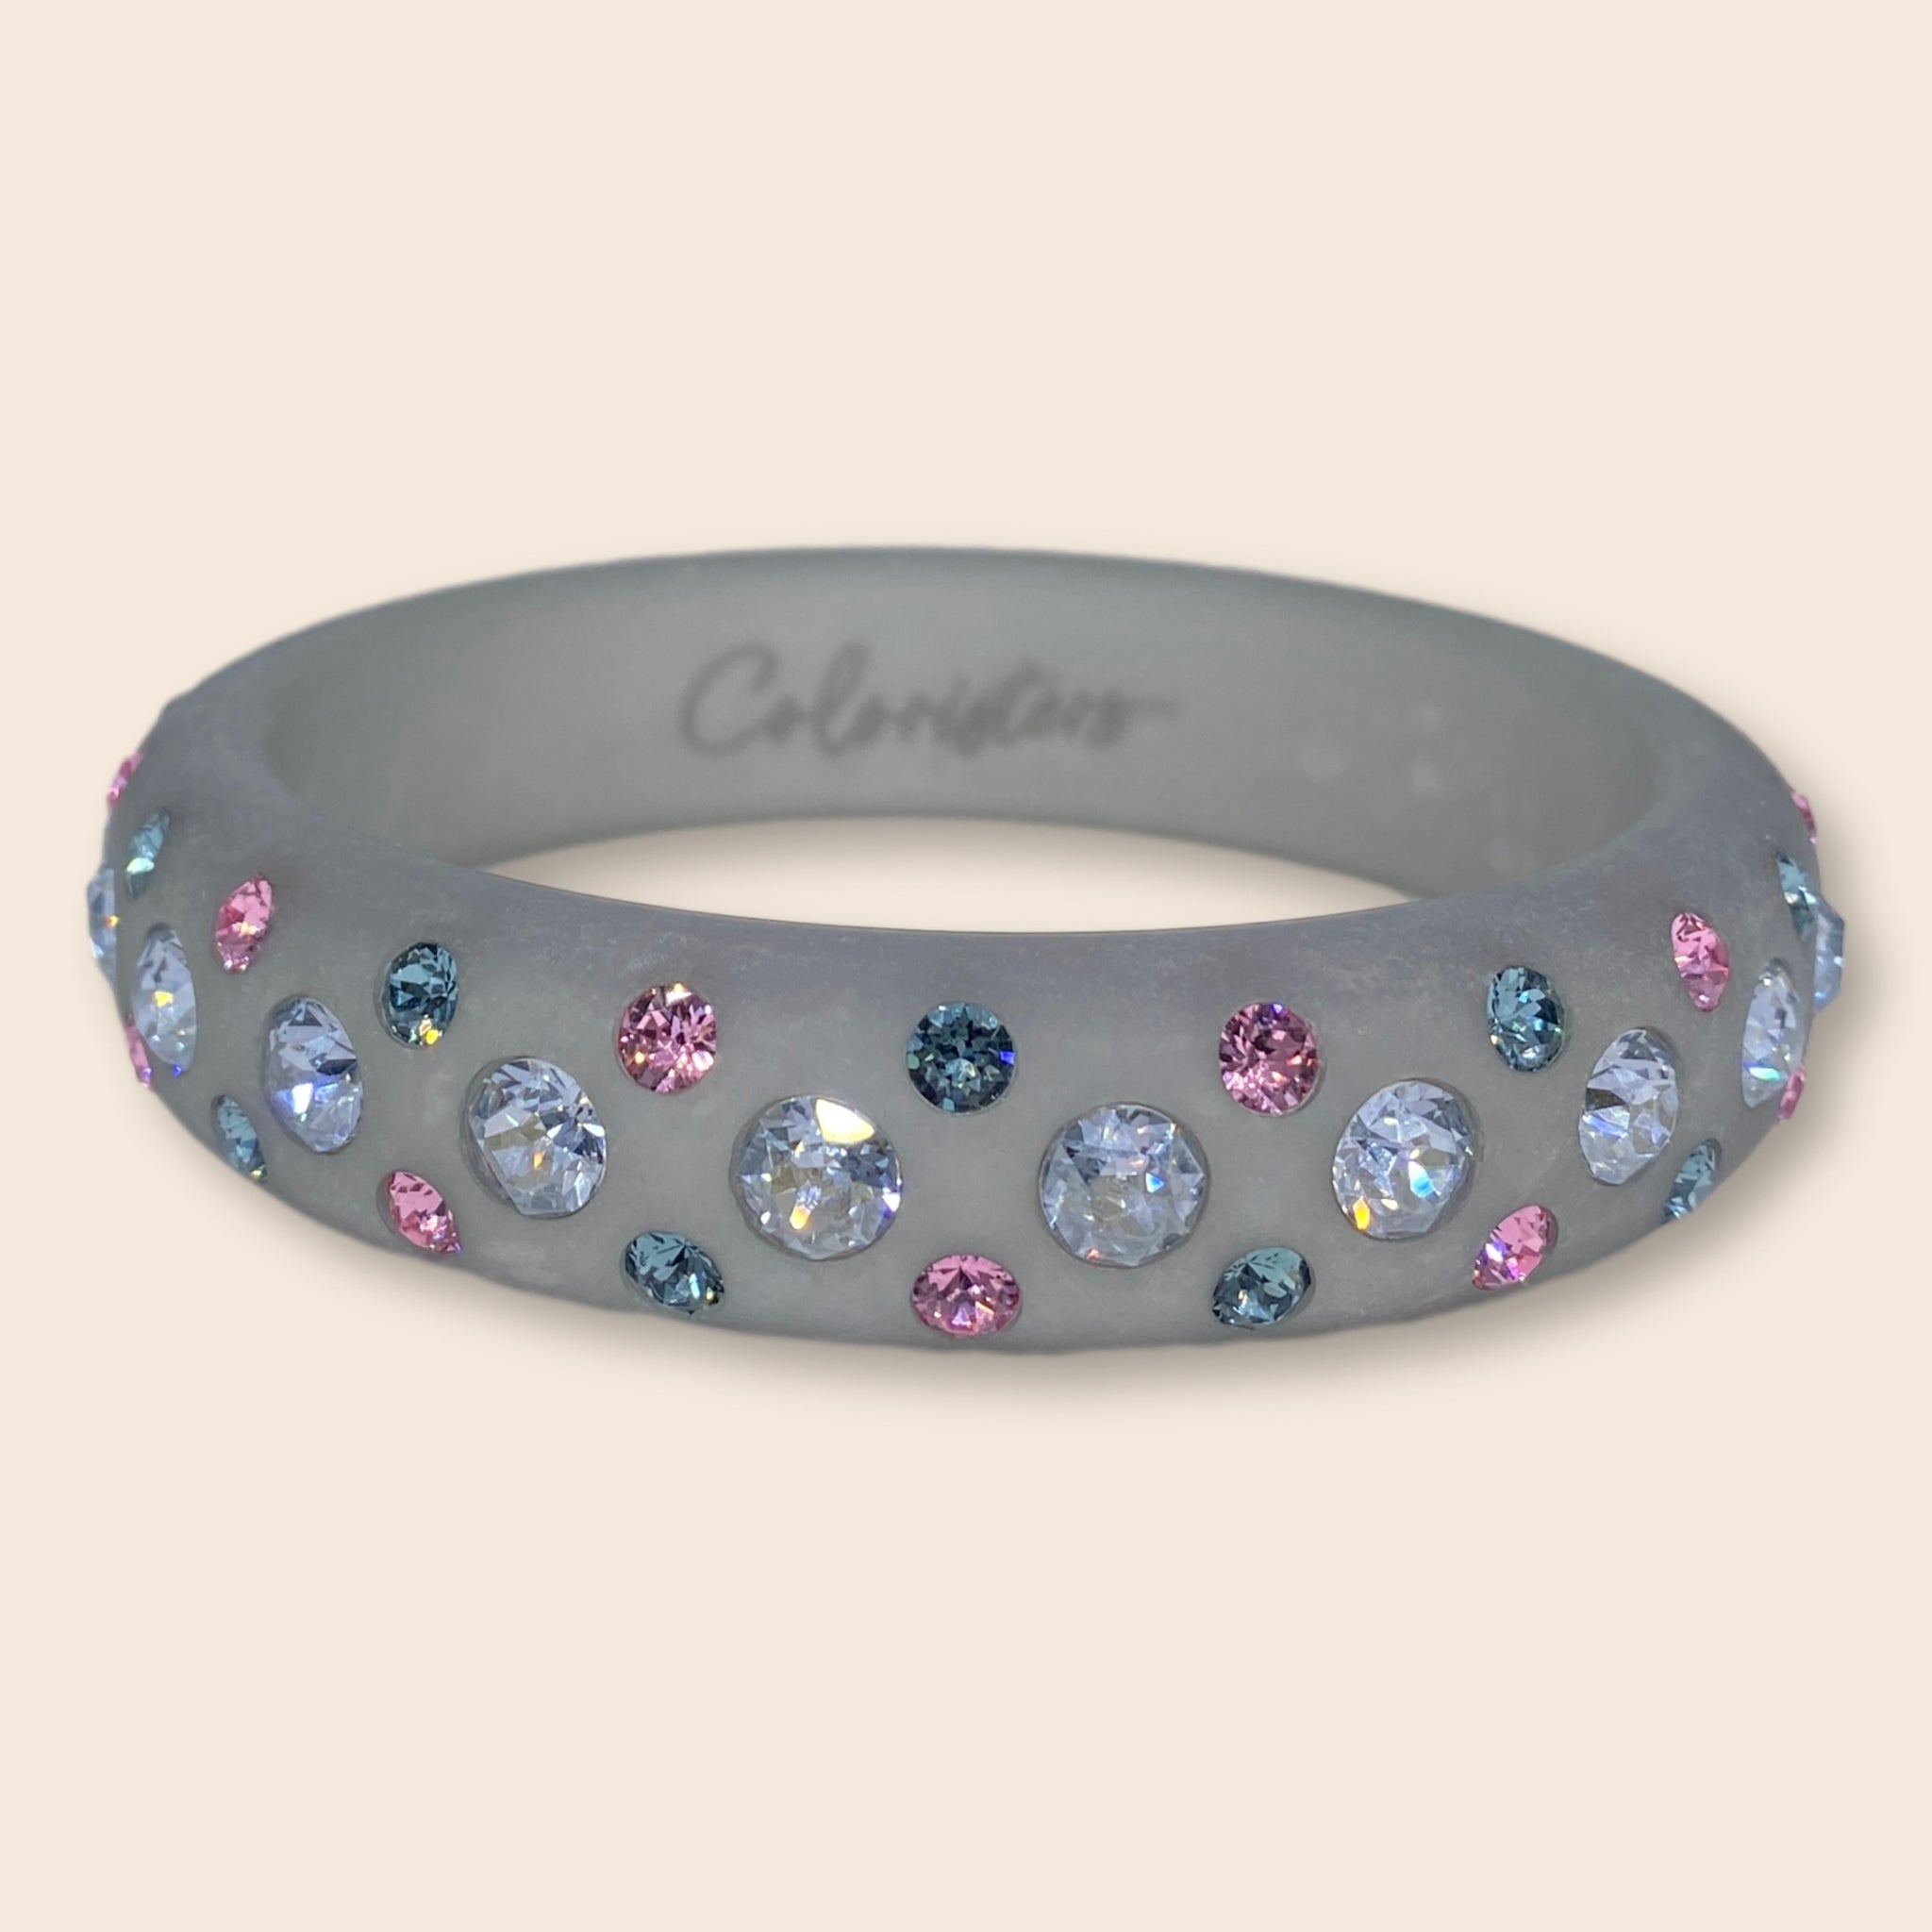 Grauer Coloristers Armreifen Catania mit pinken Kristallen. Grey Coloristers Bangle Catania with pink crystals.